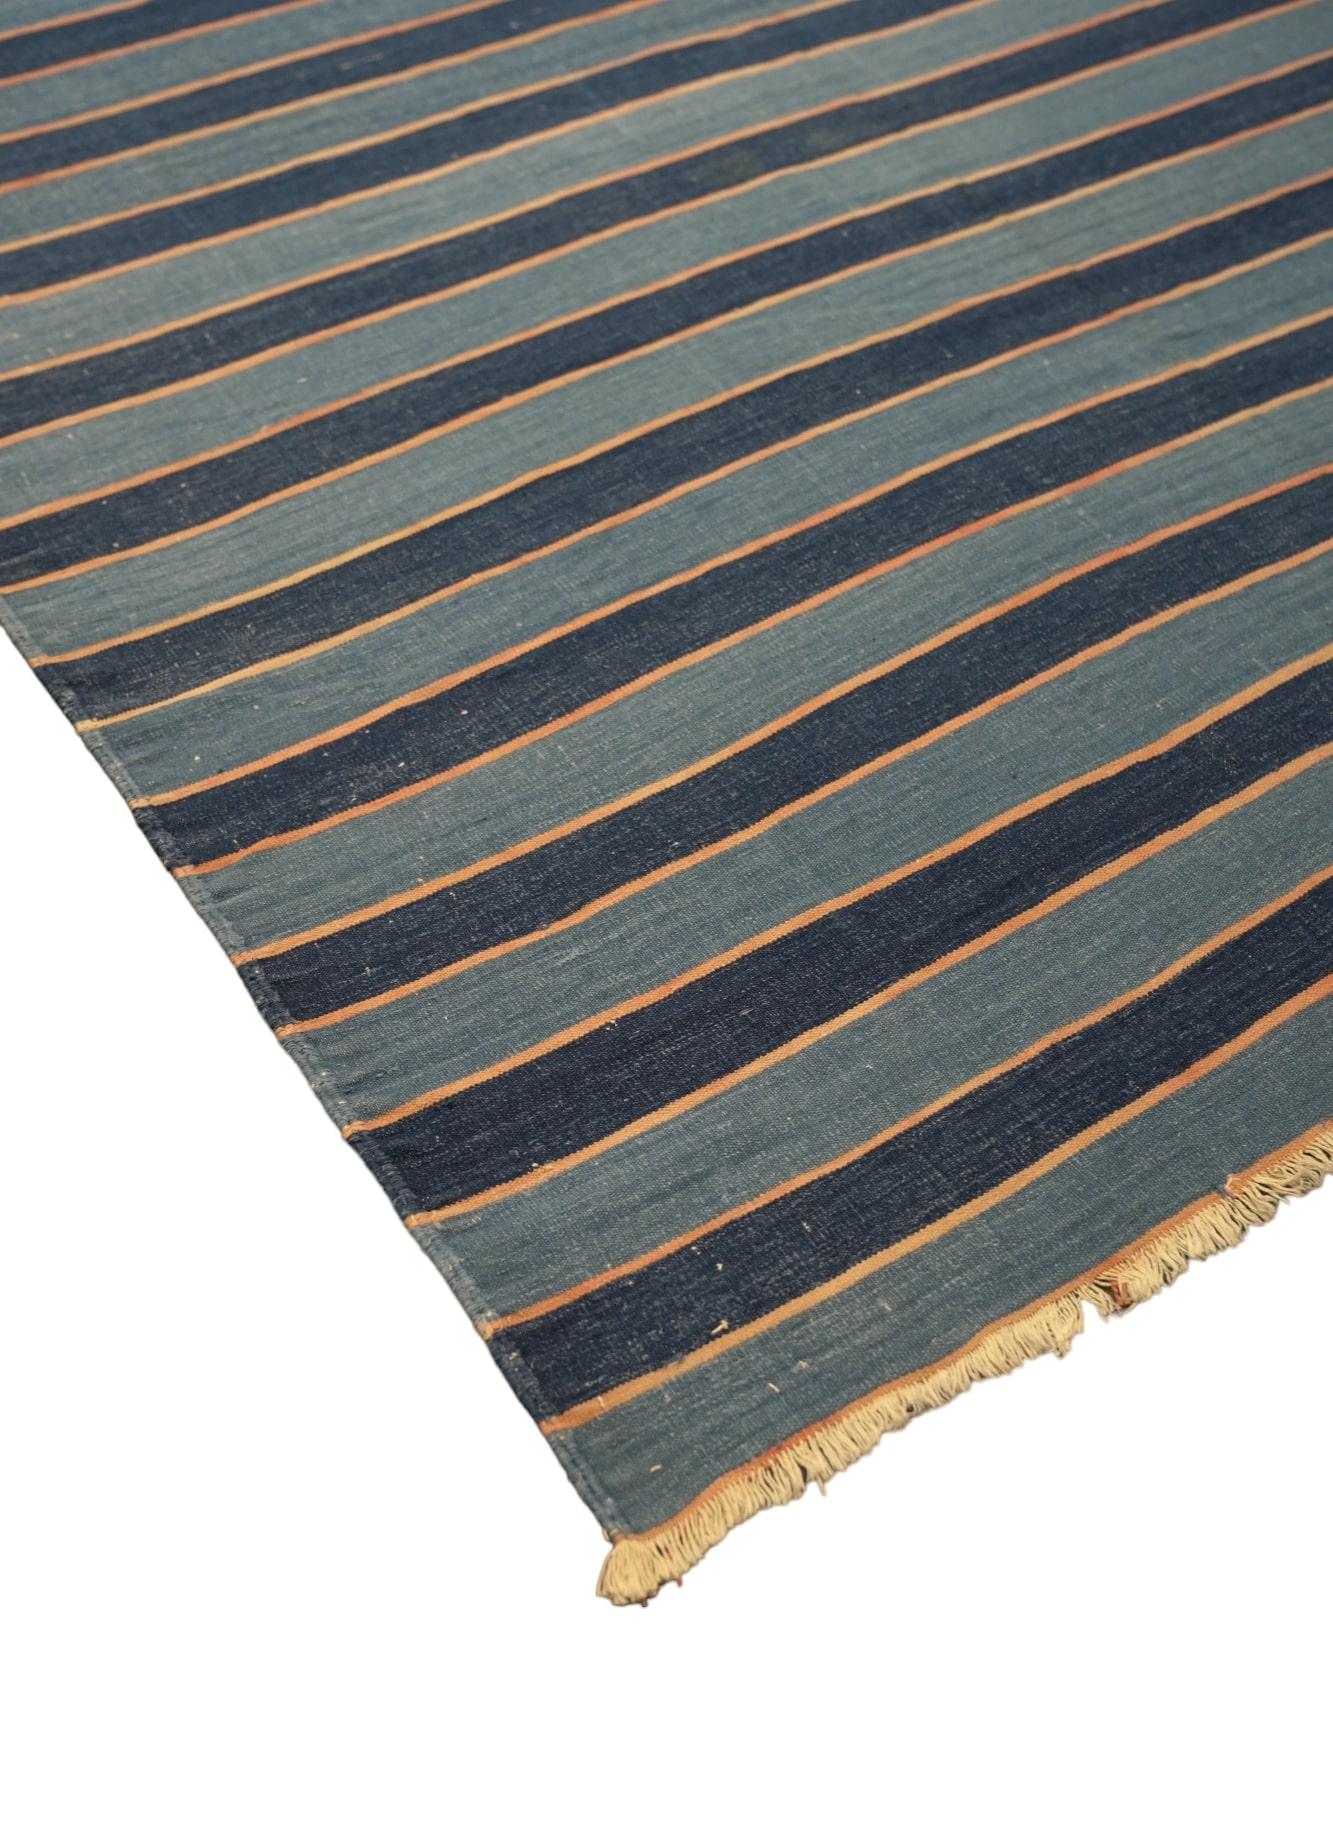 Hand-Woven Vintage Dhurrie Rug in Blue with Stripes, from Rug & Kilim For Sale